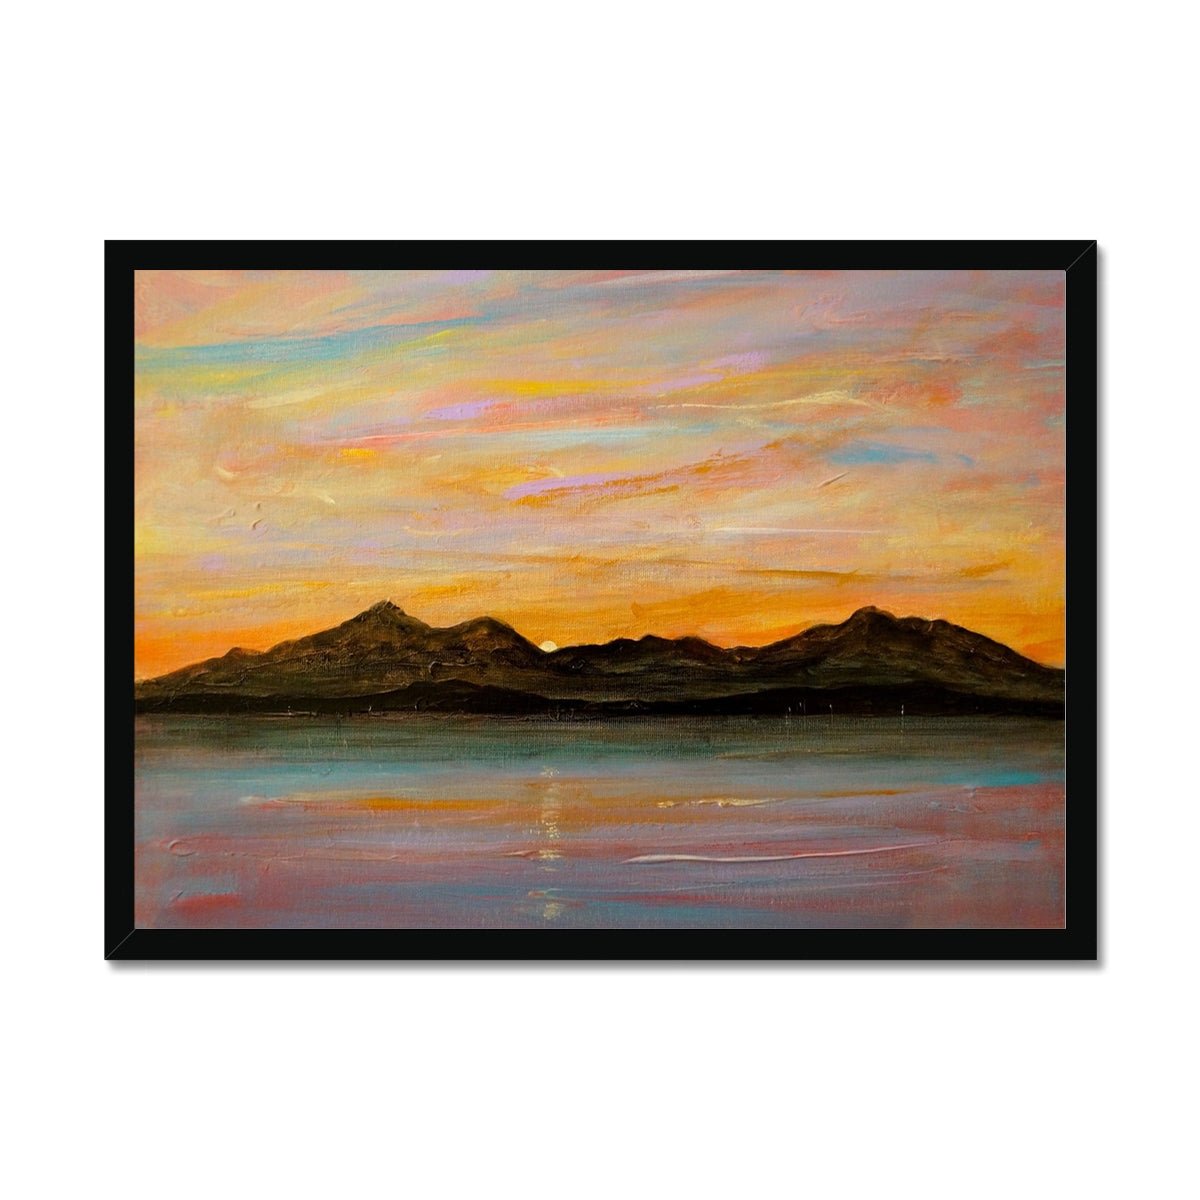 The Sleeping Warrior Arran Painting | Framed Prints From Scotland-Framed Prints-Arran Art Gallery-A2 Landscape-Black Frame-Paintings, Prints, Homeware, Art Gifts From Scotland By Scottish Artist Kevin Hunter